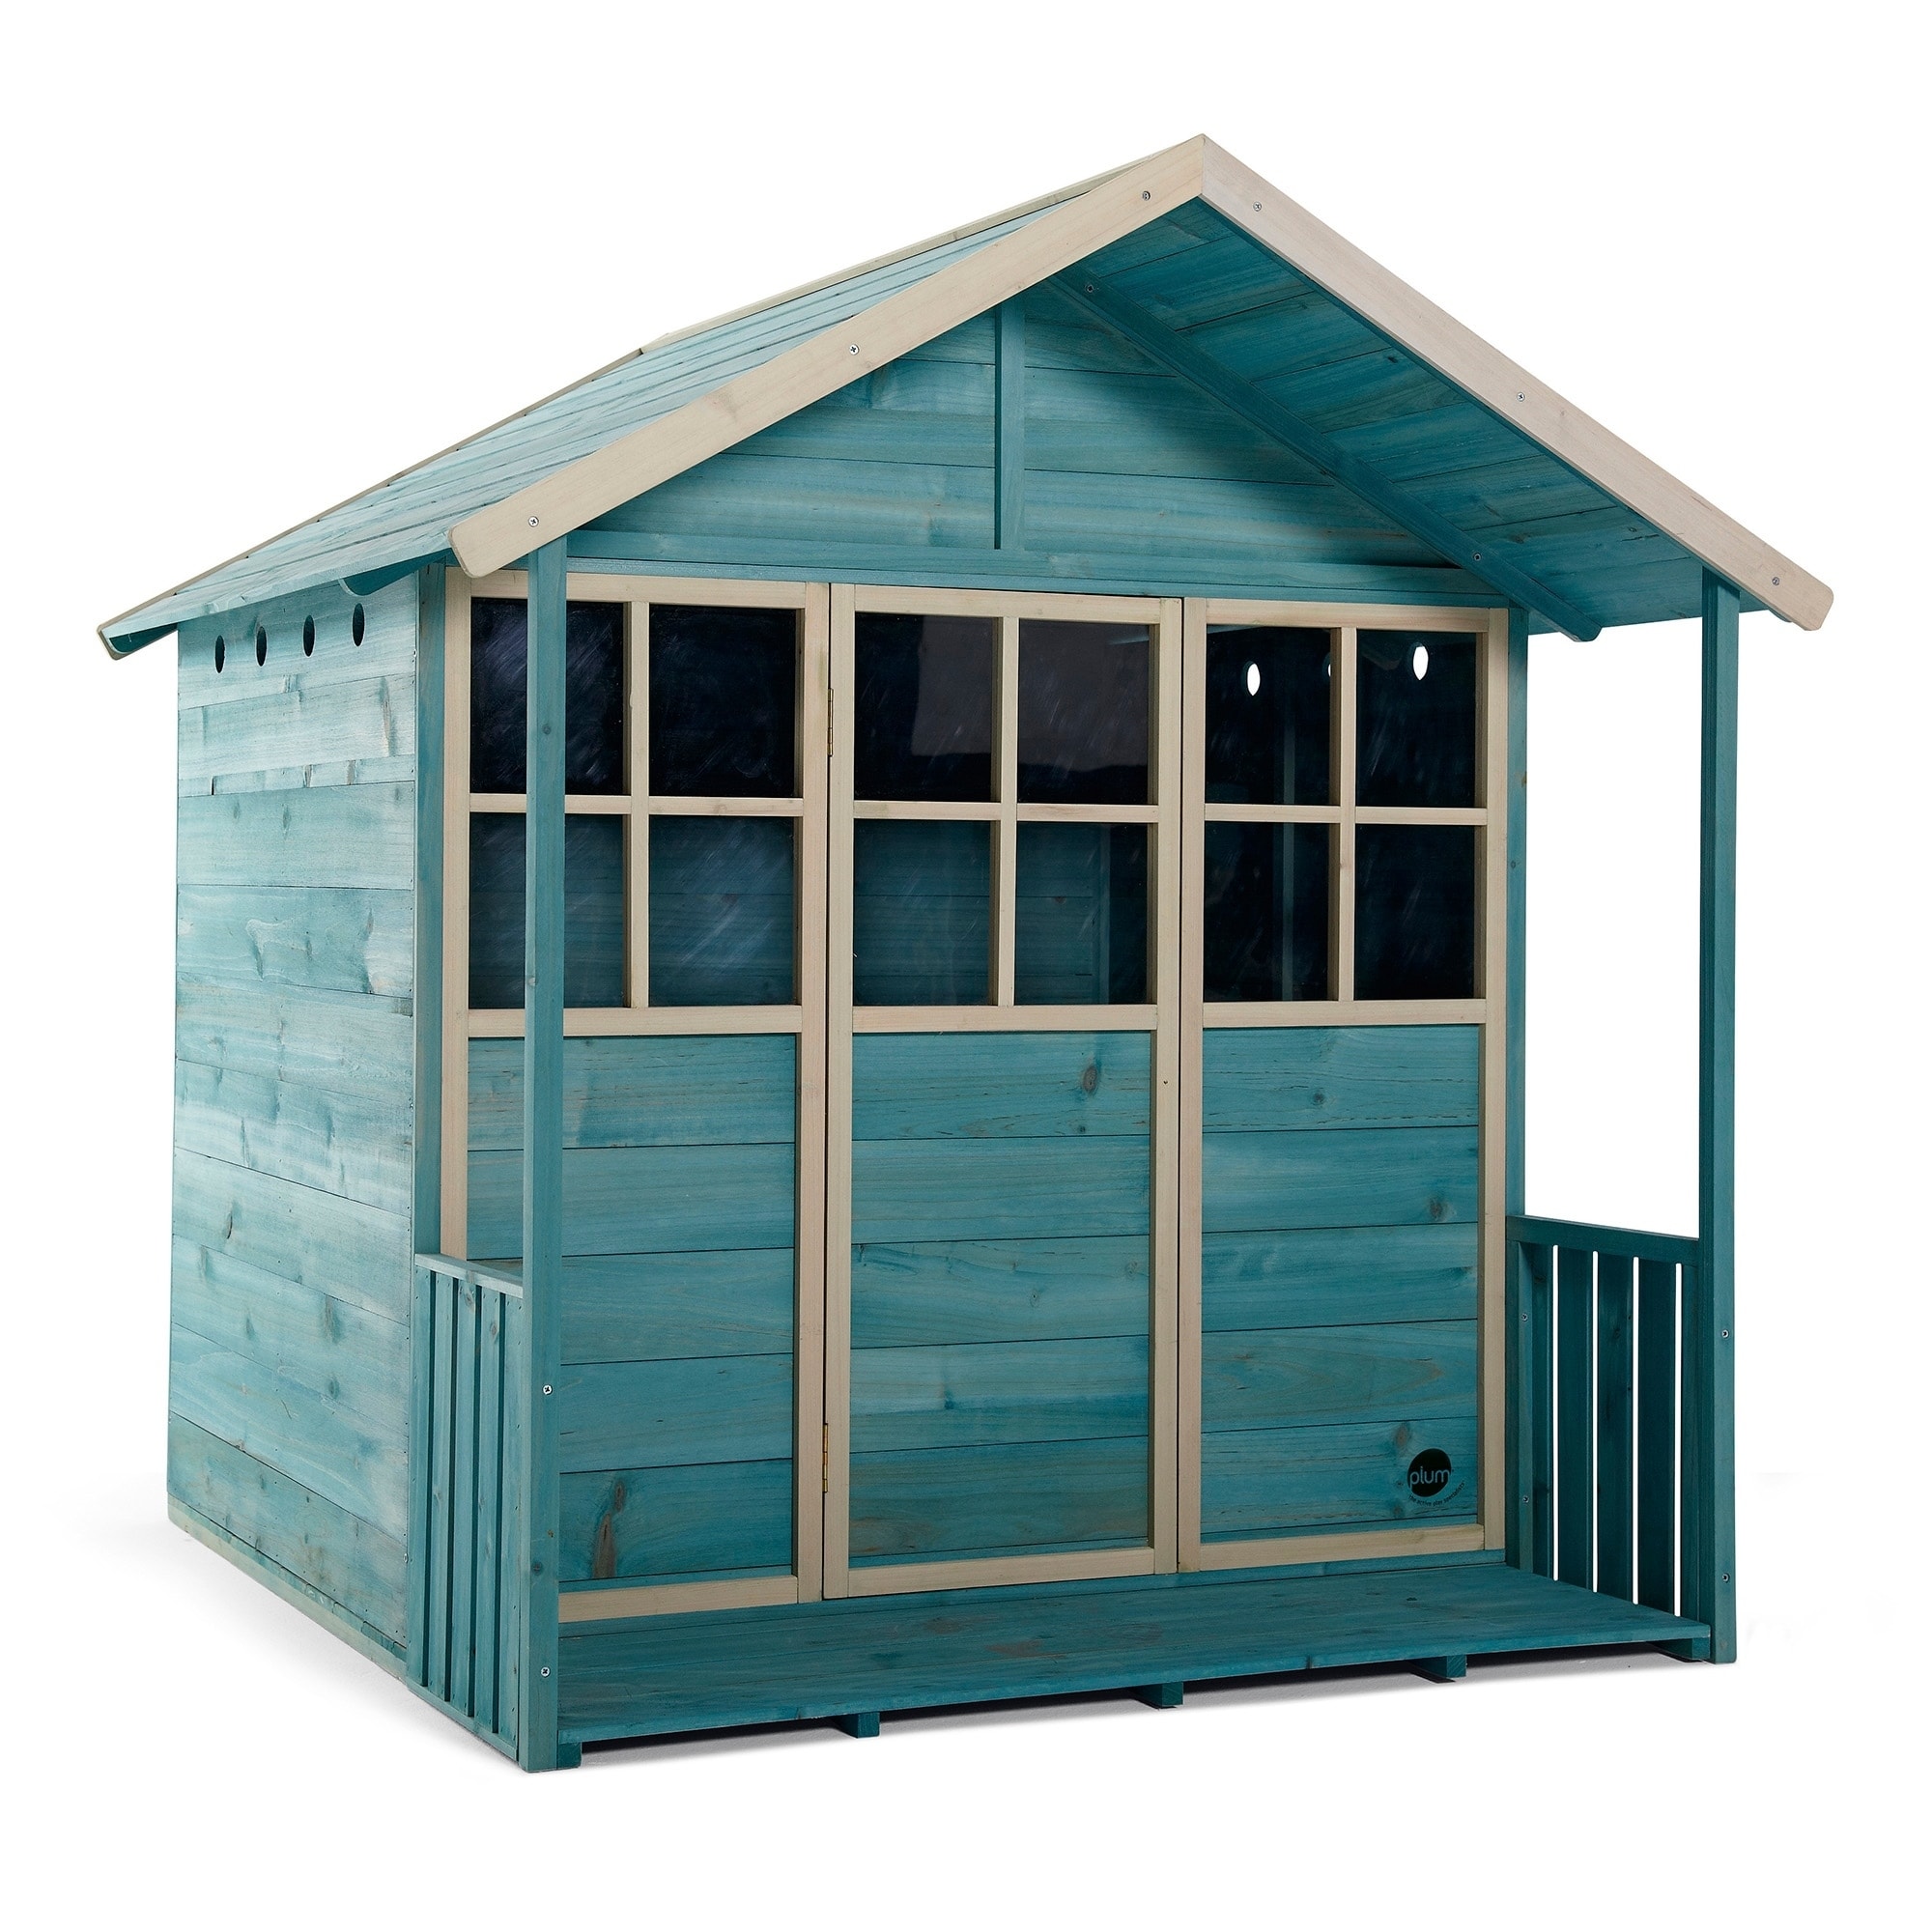 where can i buy a wooden playhouse